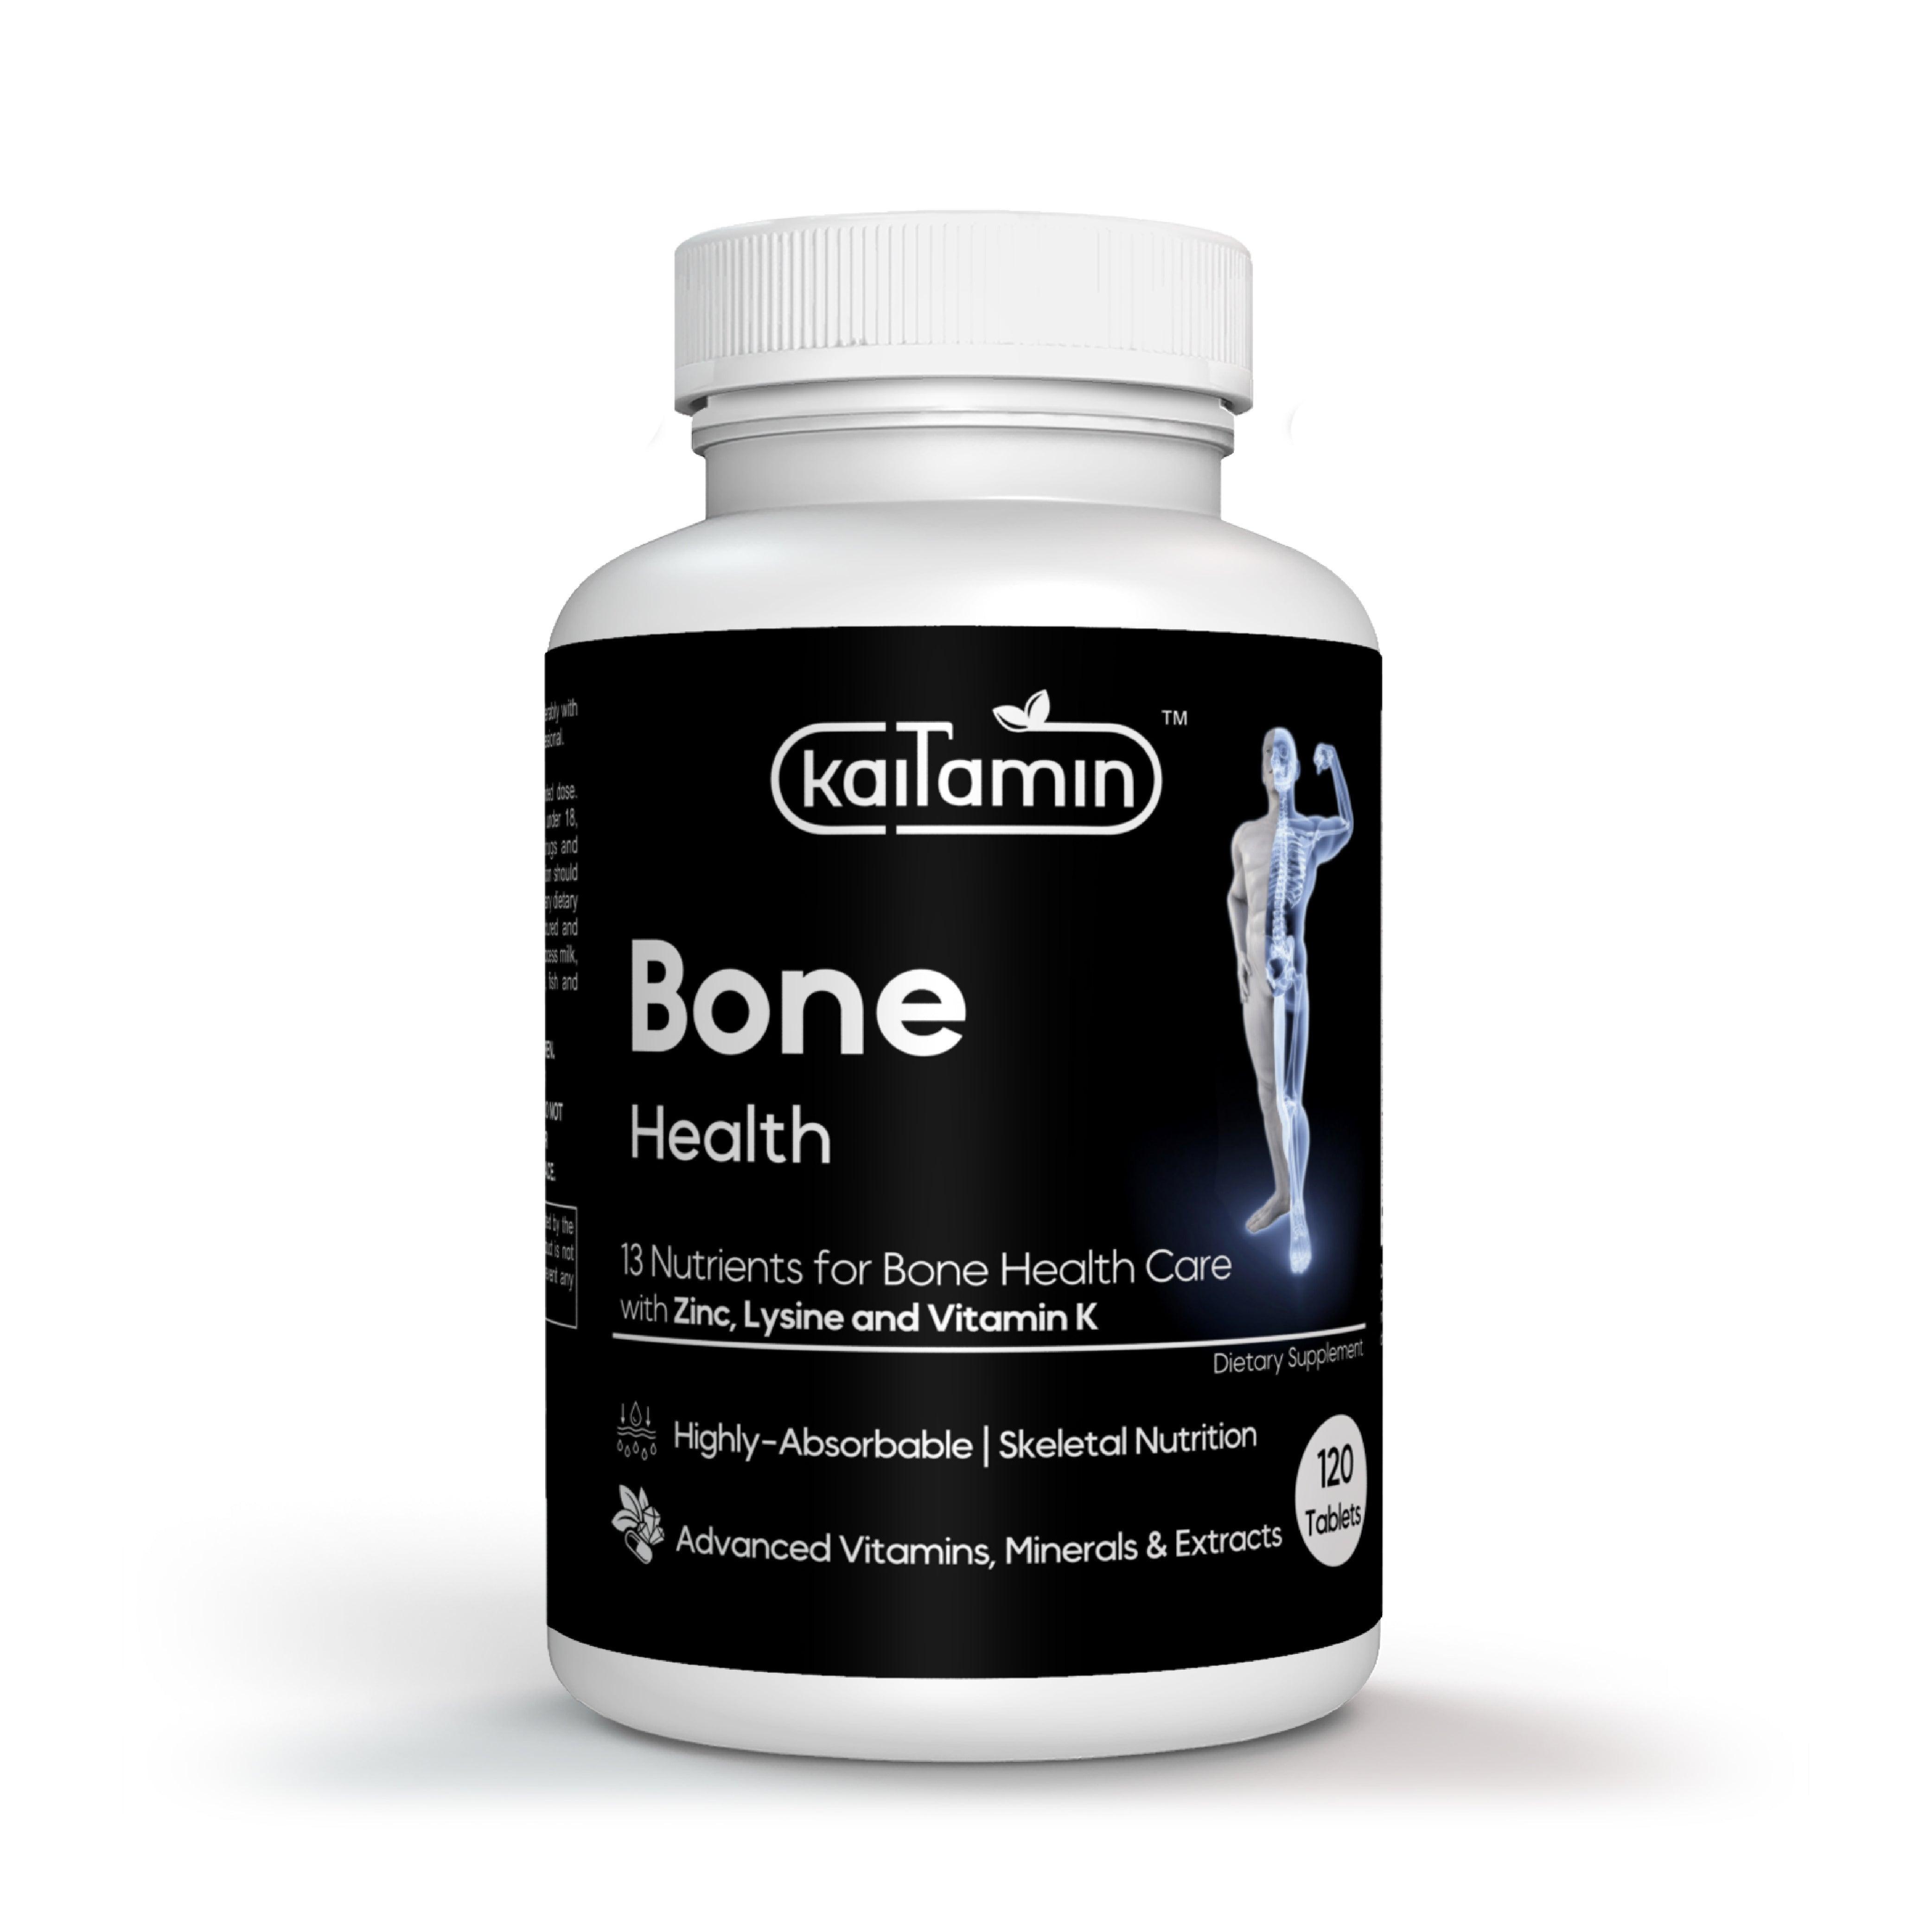 Bone Health - Supports Natural Bones, Density and Joints -120 Tablets - Kaitamin